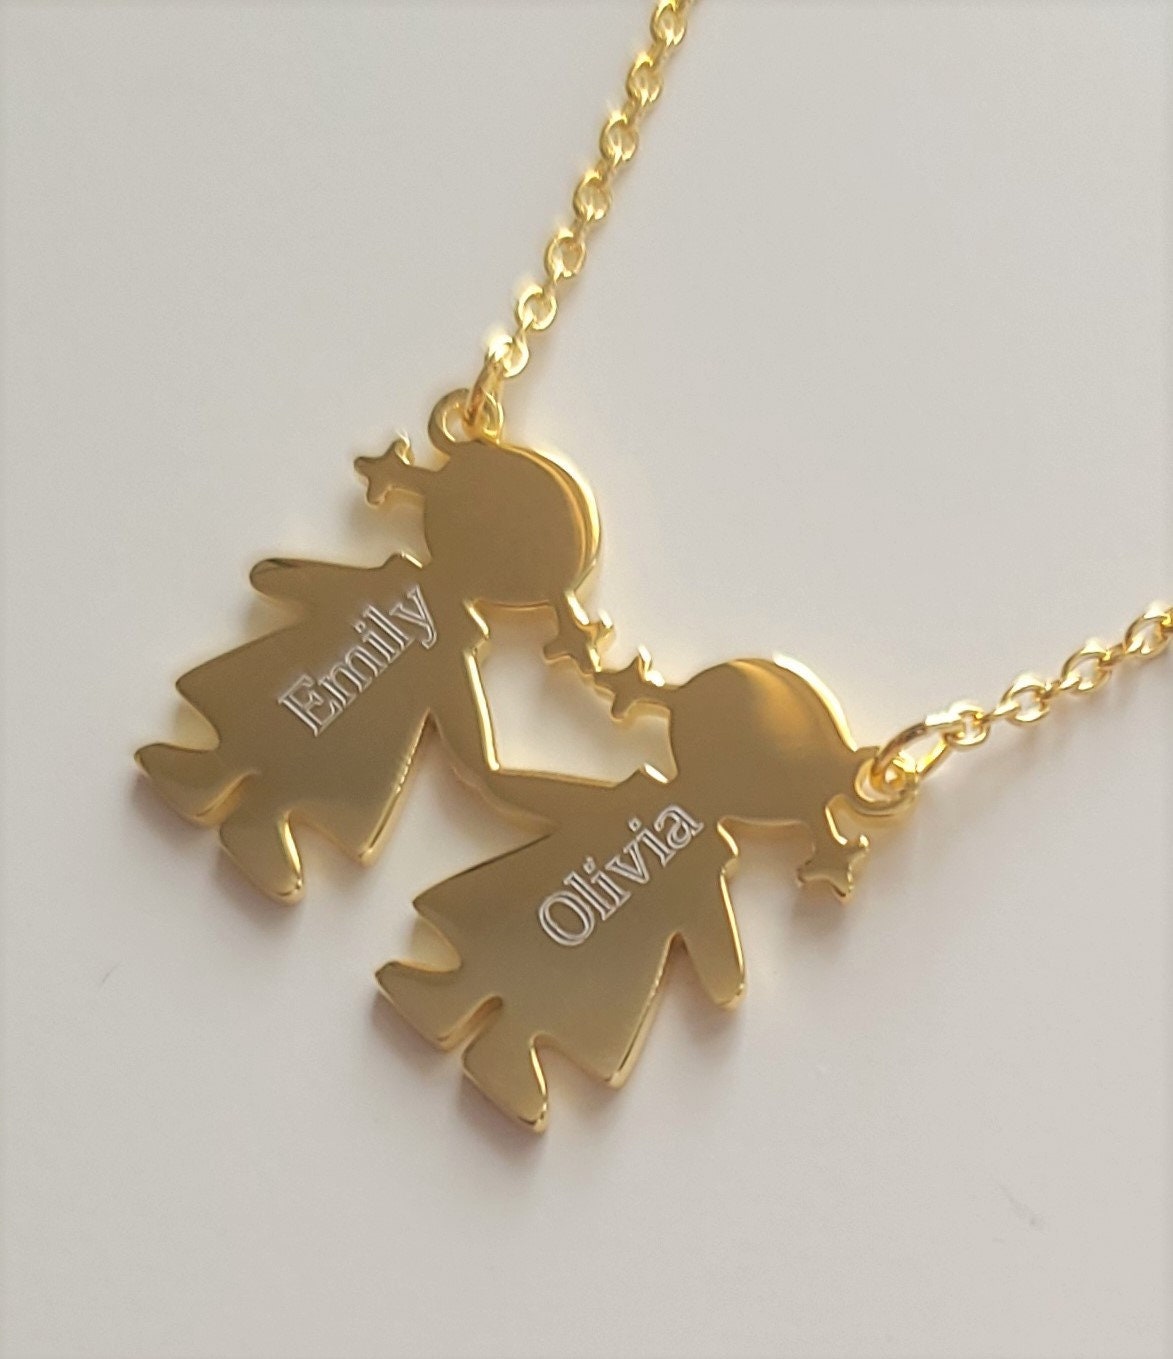 Best Baby Gifts Baby Keepsake Necklace Gold Etch Finish | Mom Jewelry  Unique Baby Gifts Filled With Baby Charms And Exclusive Message Locket Baby  Footprint Jewelry | Baby Boy Charm Necklace - Walmart.com